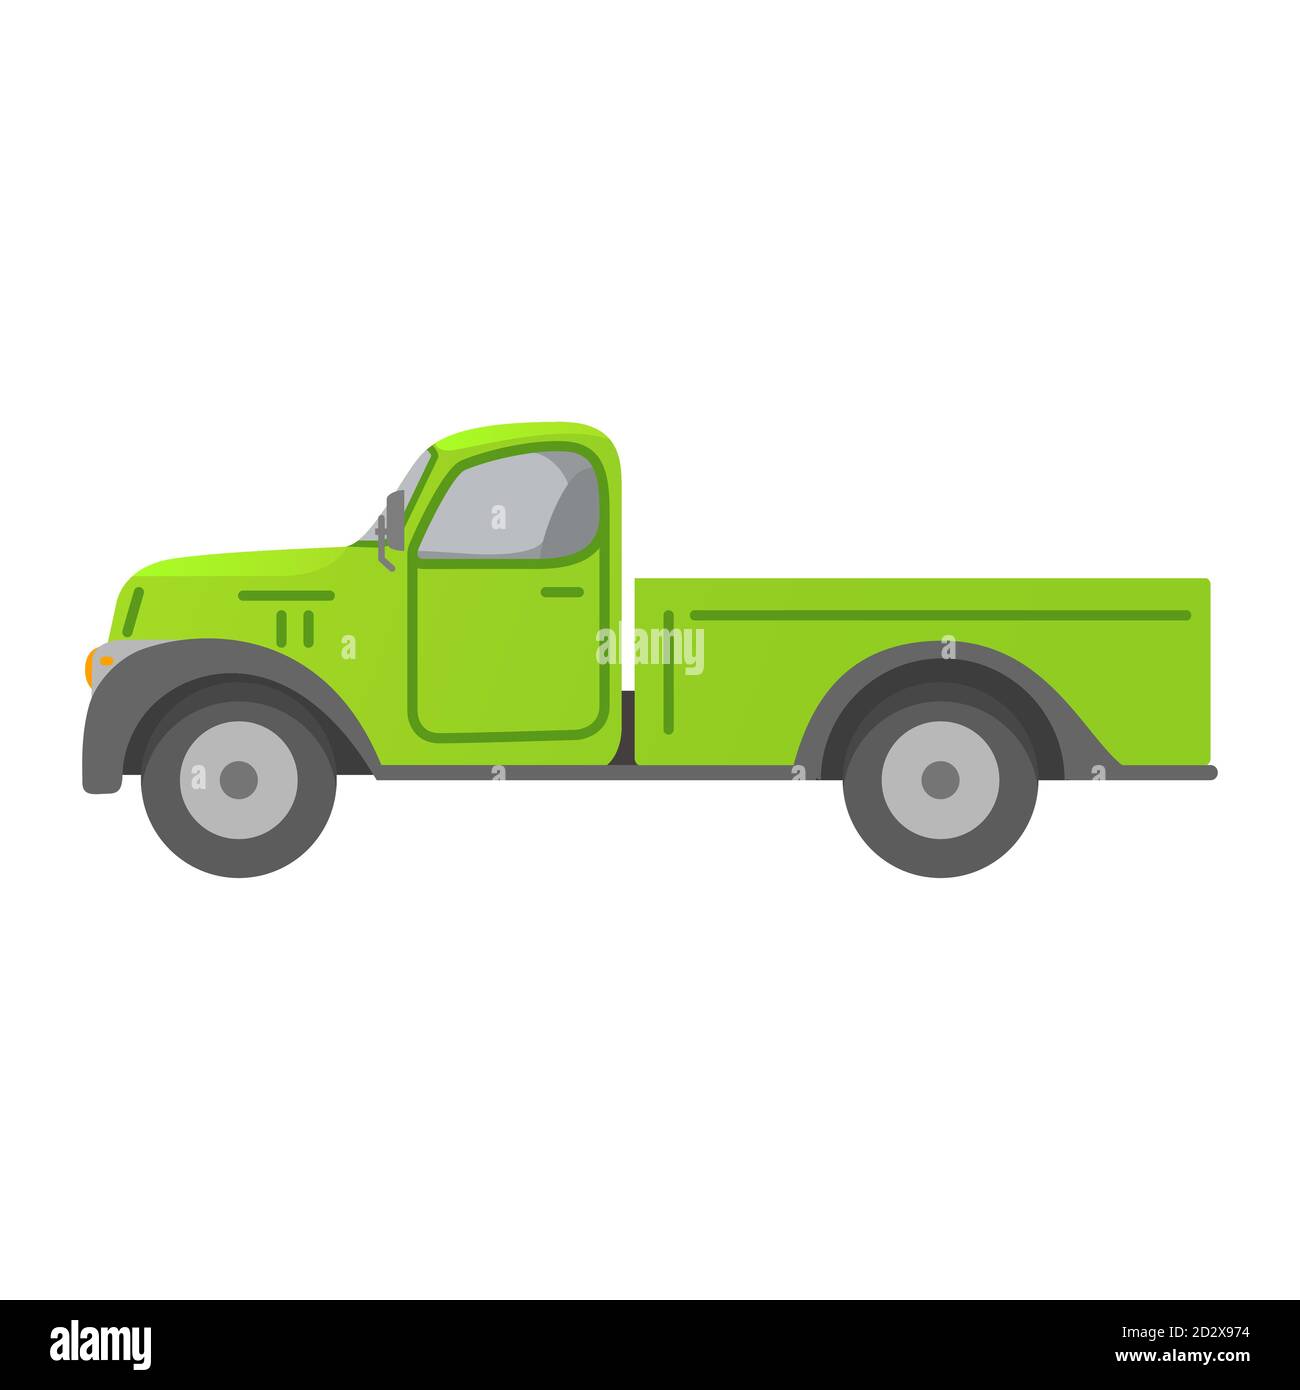 Retro truck car. Delivery vehicle. Flat vector illustration. Stock Vector